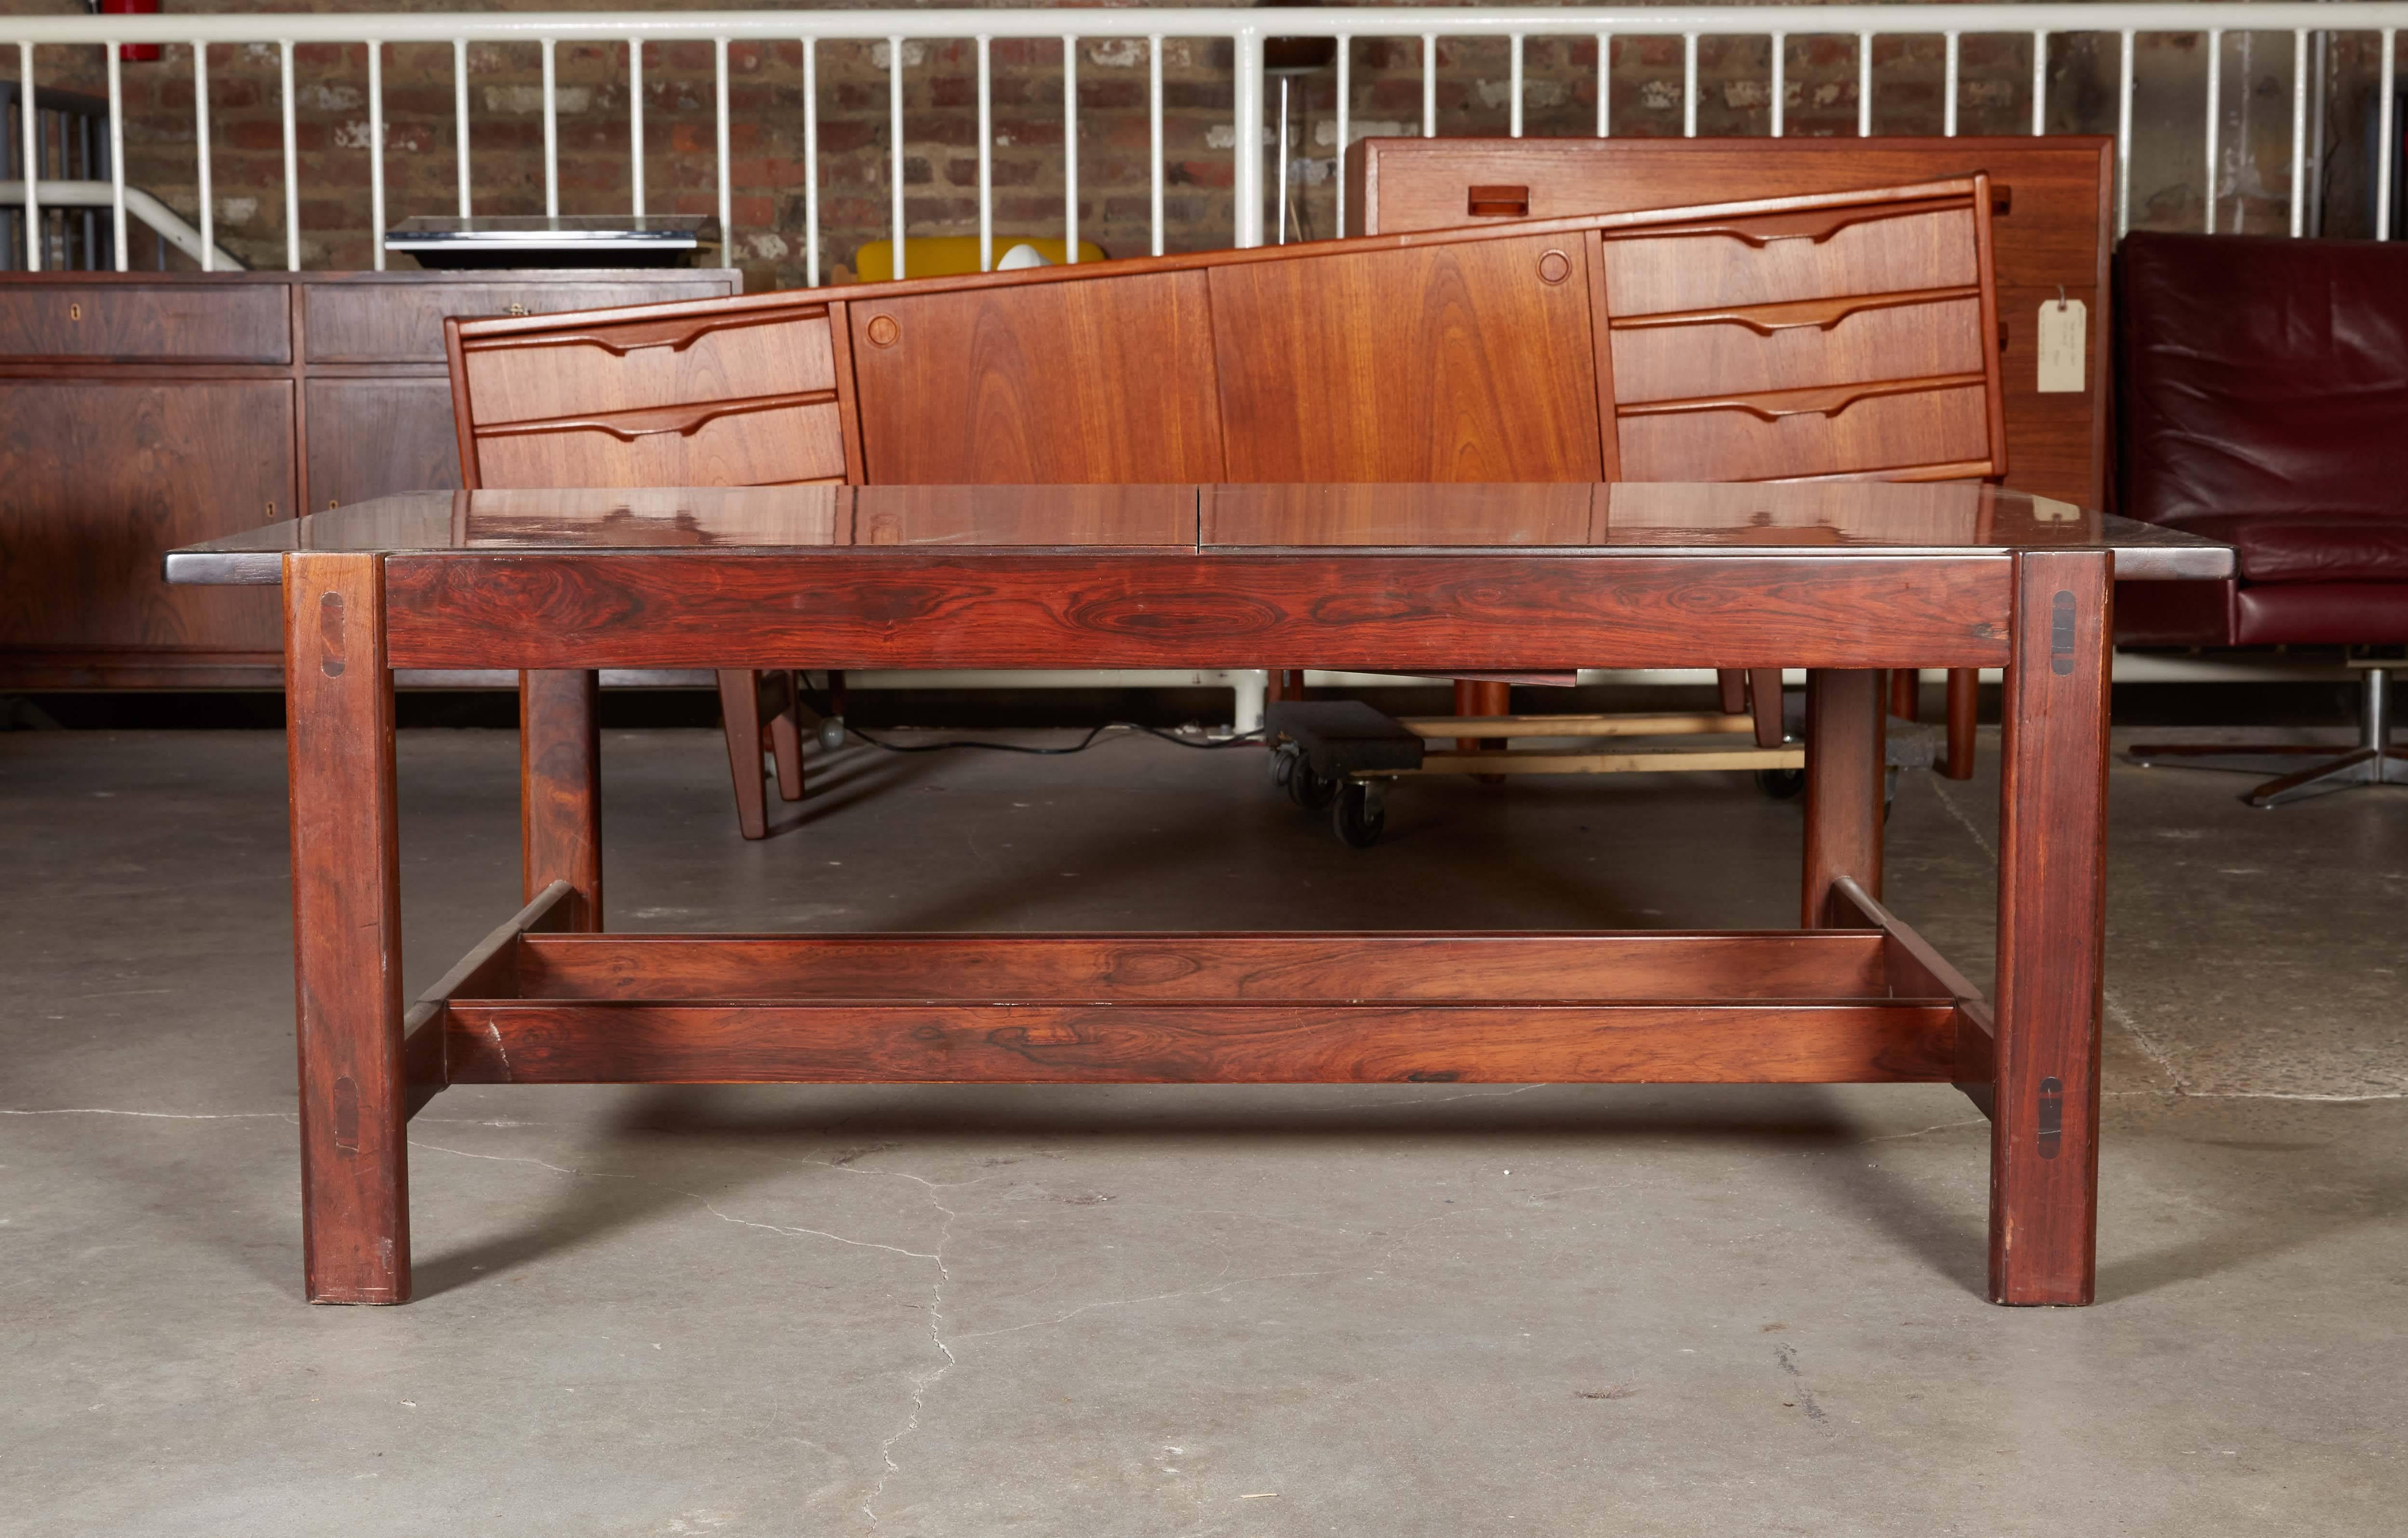 1960s Rosewood Coffee Table by Torbjorn Afdal

This vintage coffee table expands. This has a swing leaf made with laminate giving you a built in coaster, maybe a card table, or when you have guests because it just allows for more serving space. Easy